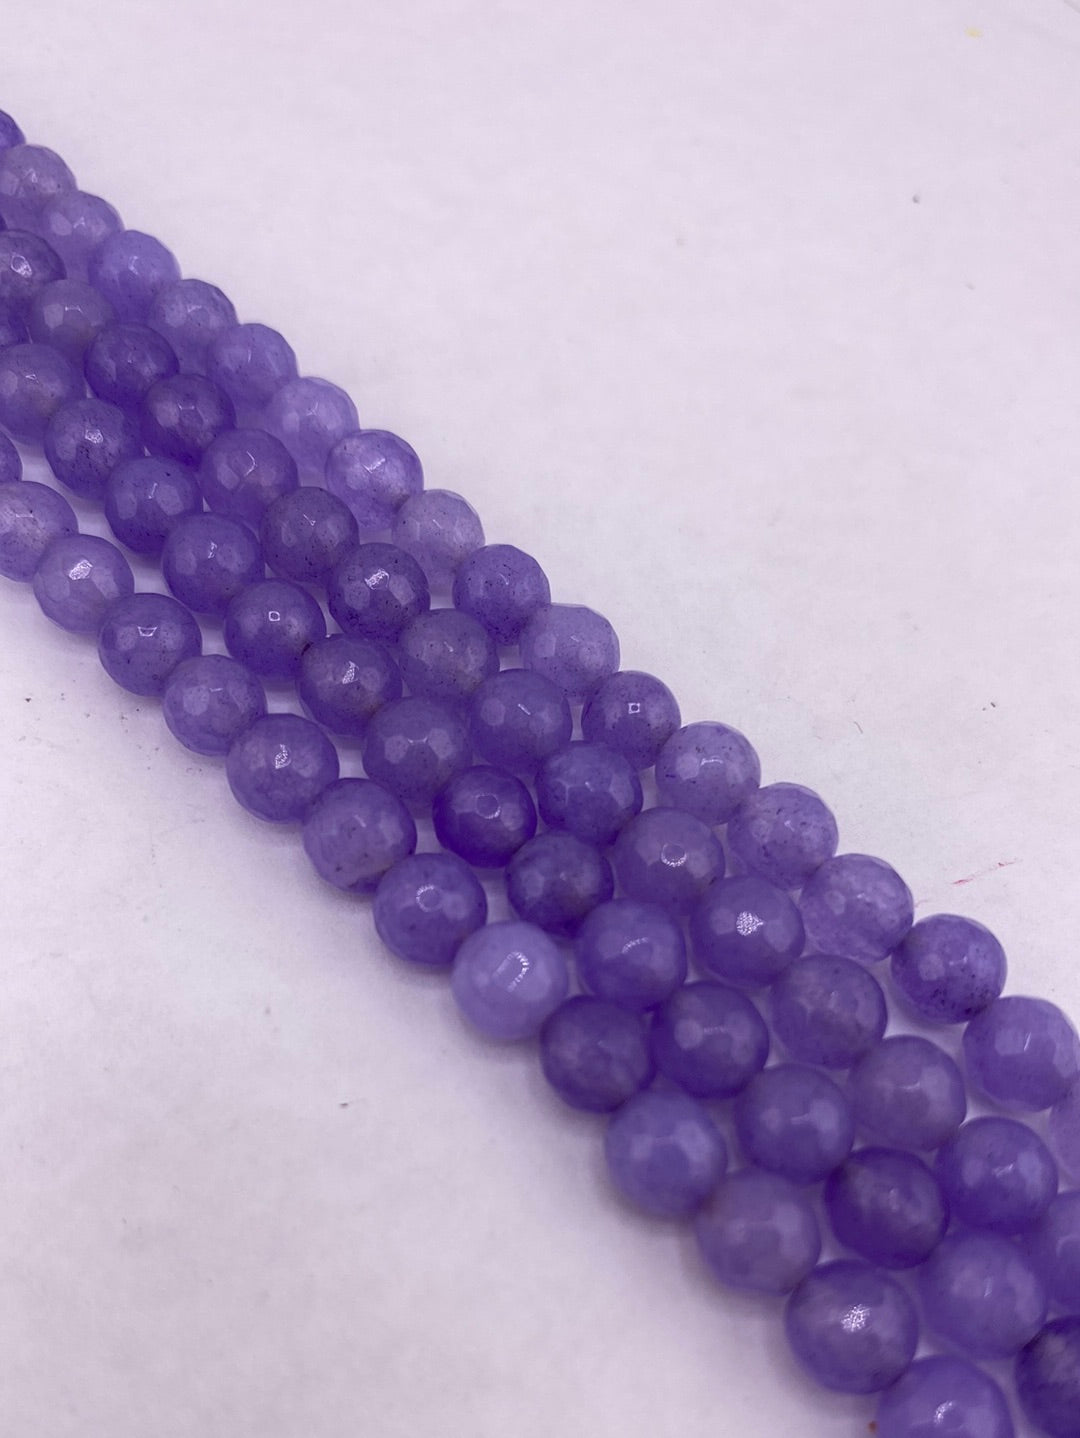 Crafting supplies such as chalcedony beads available at wholesale and retail prices, only at our crystal shop in San Diego!